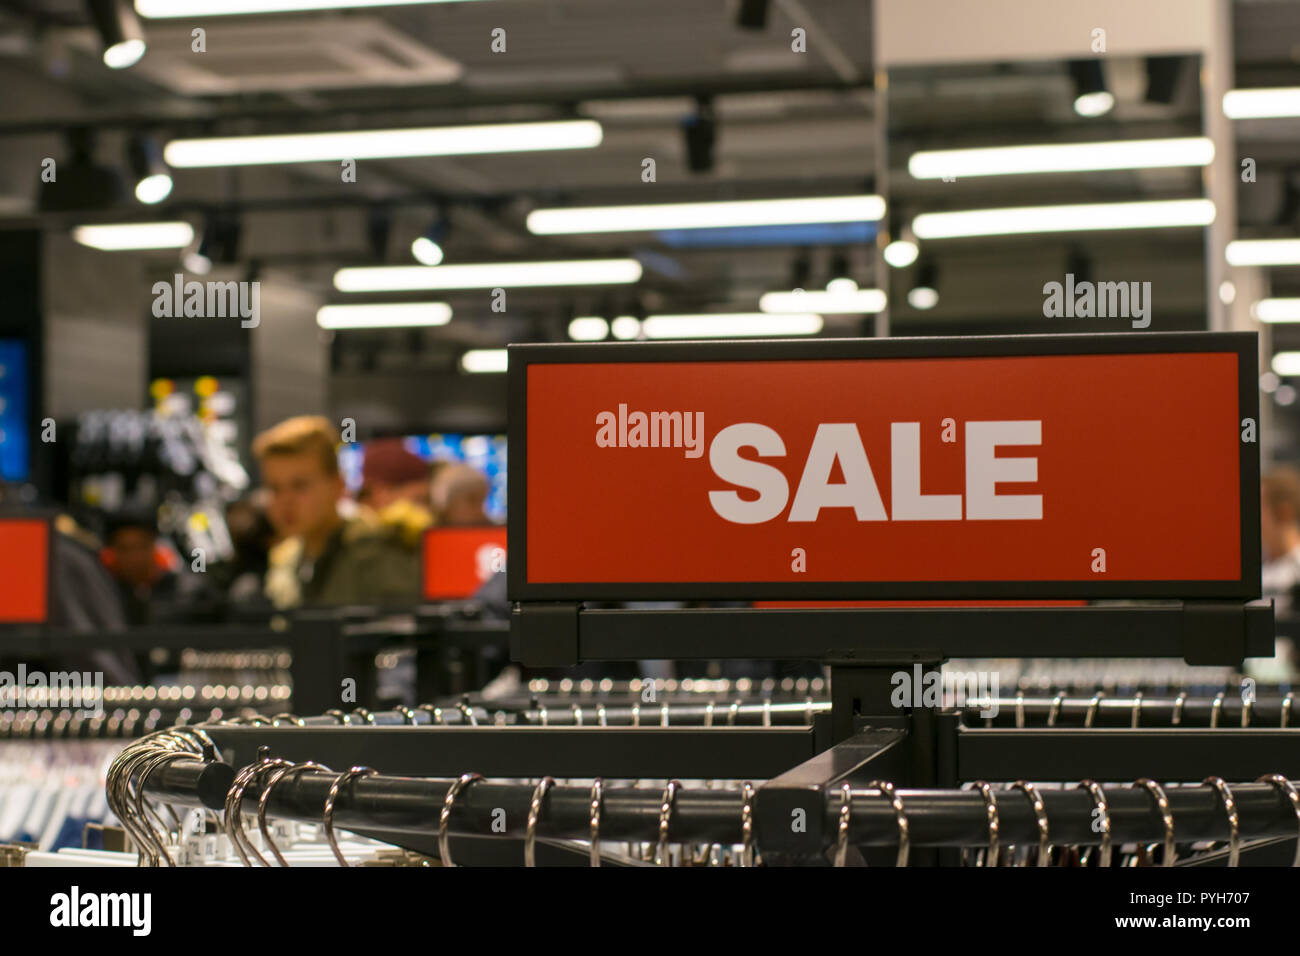 Shopping fever in Outletcity Metzingen, Germany. Reebok and Adidas sale Stock Photo